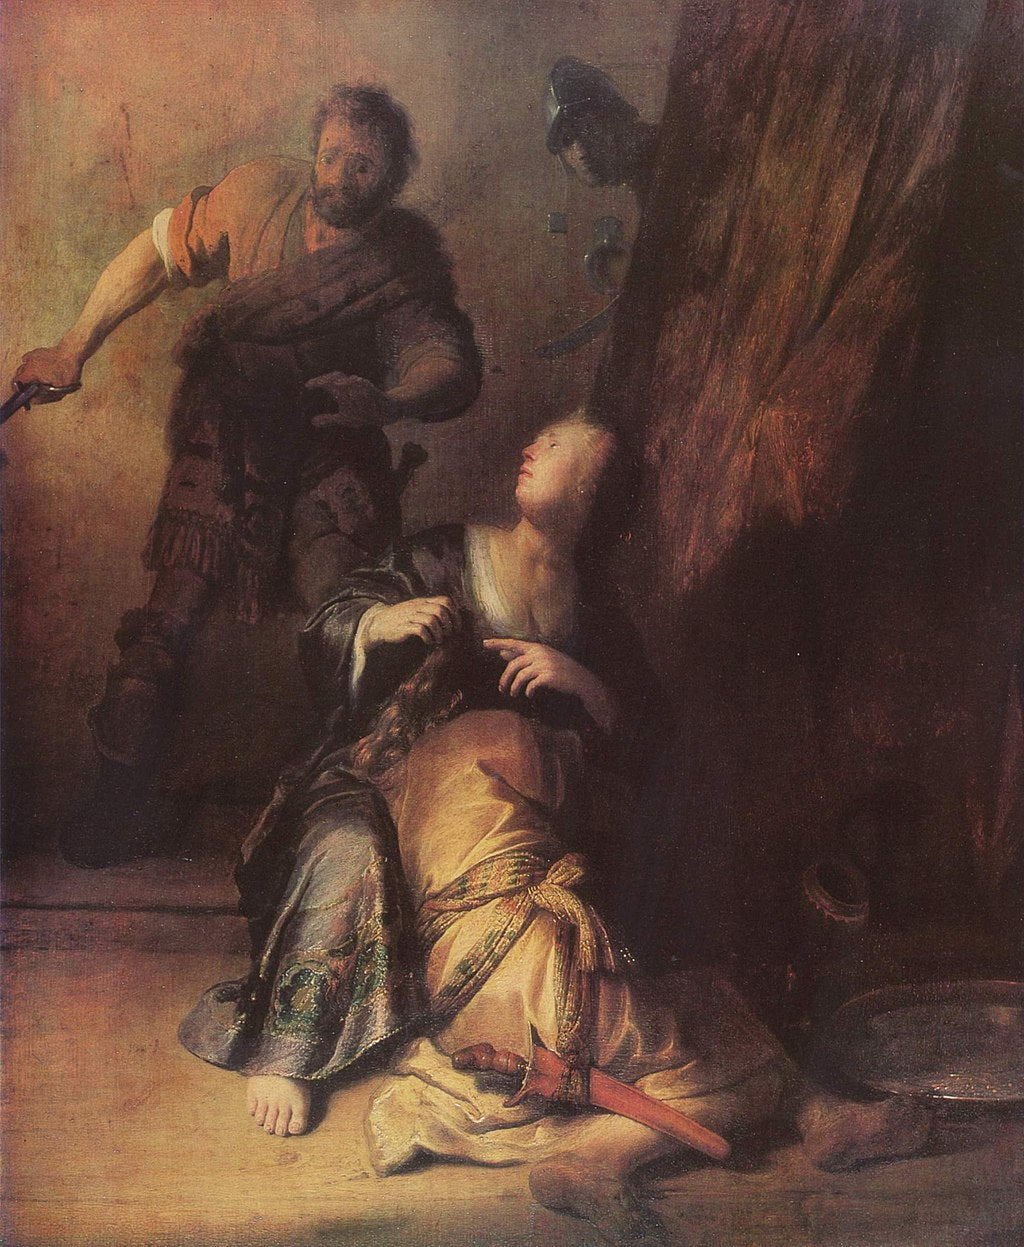 Samson Betrayed by Delilah Painting by Rembrandt Reproduction Oil on Canvas Painting by Rembrandt Reproduction Oil on Canvas